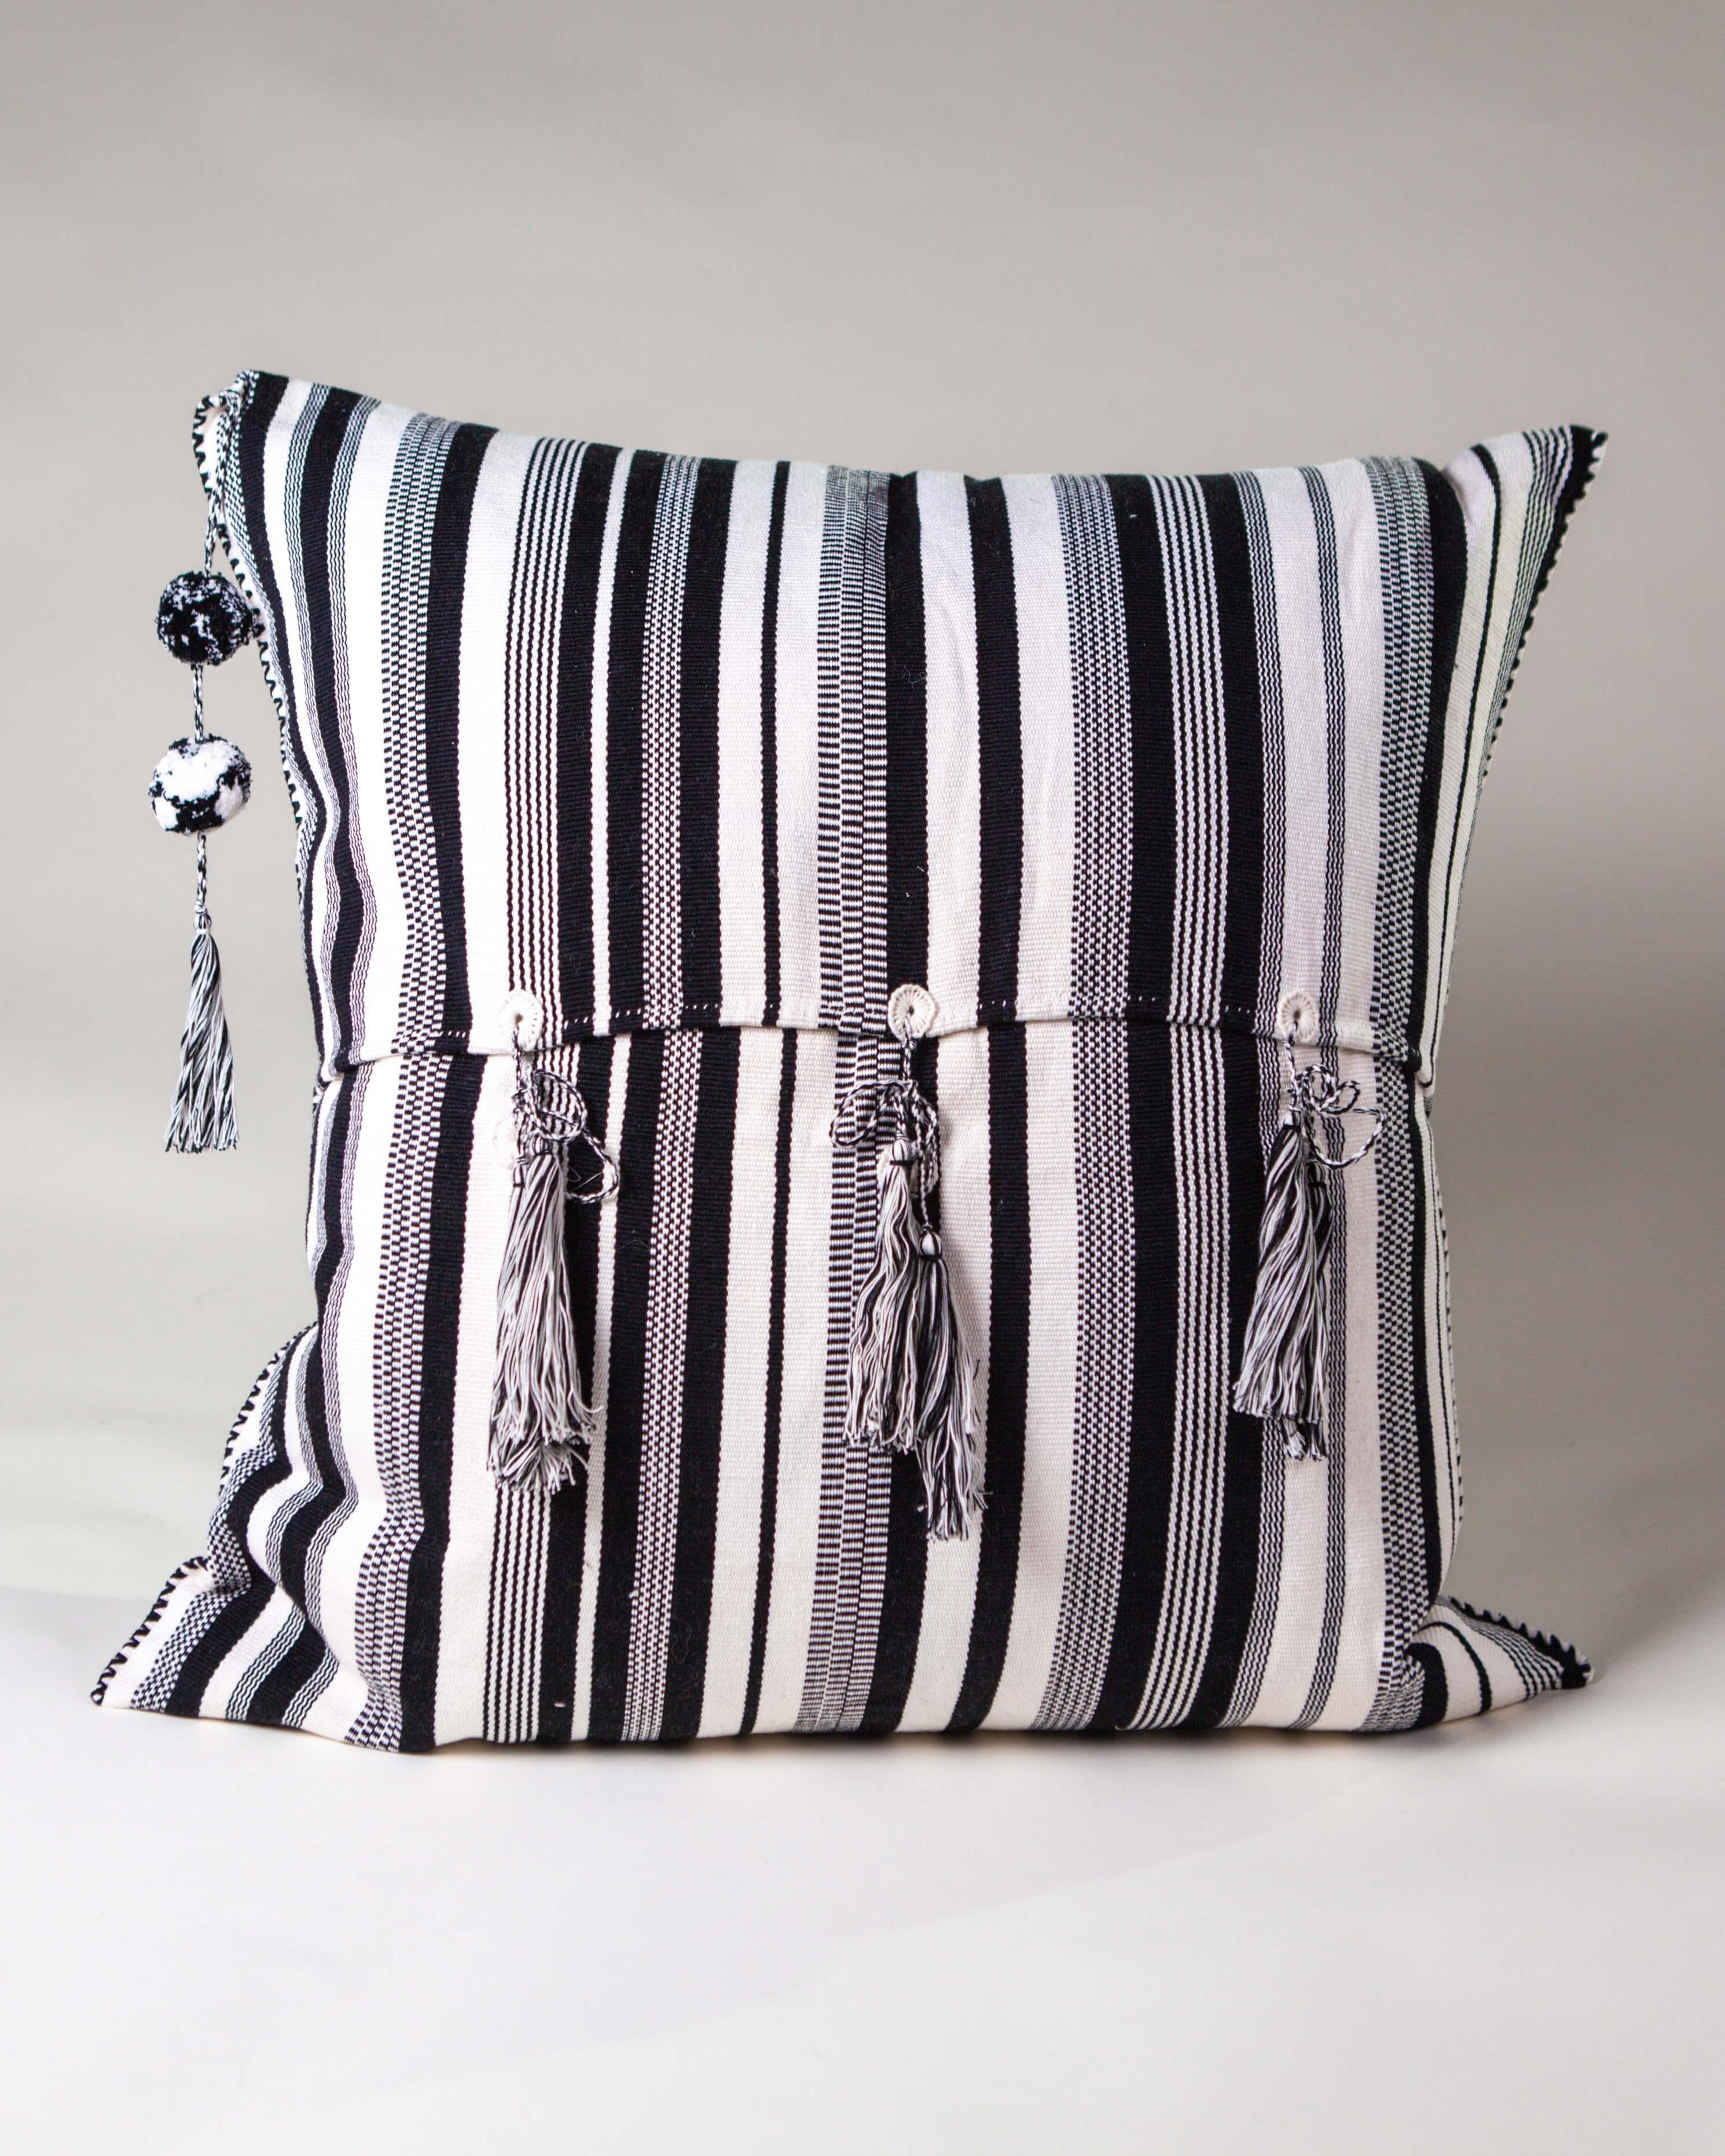 Mexican Handwoven Fine Cotton Throw Pillow in Thin Black and White Stripes, in Stock